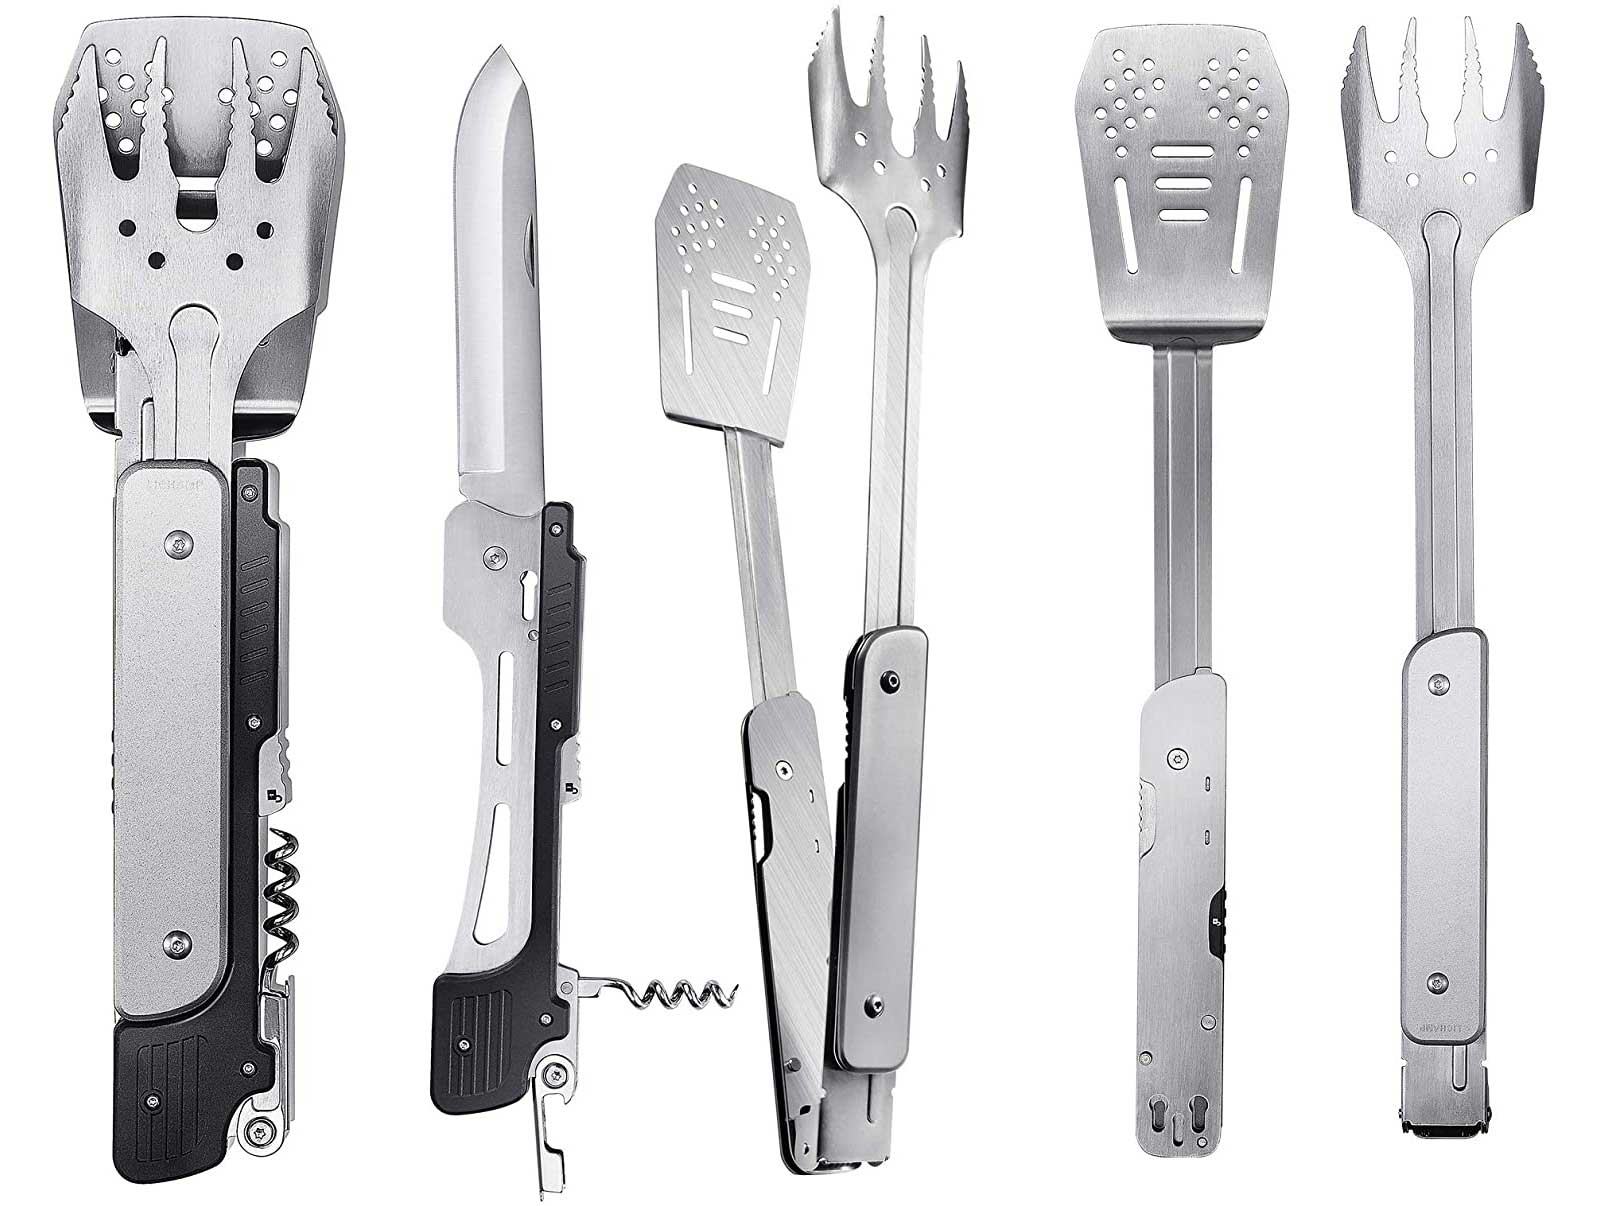 BBQ tools set for all types of grilling